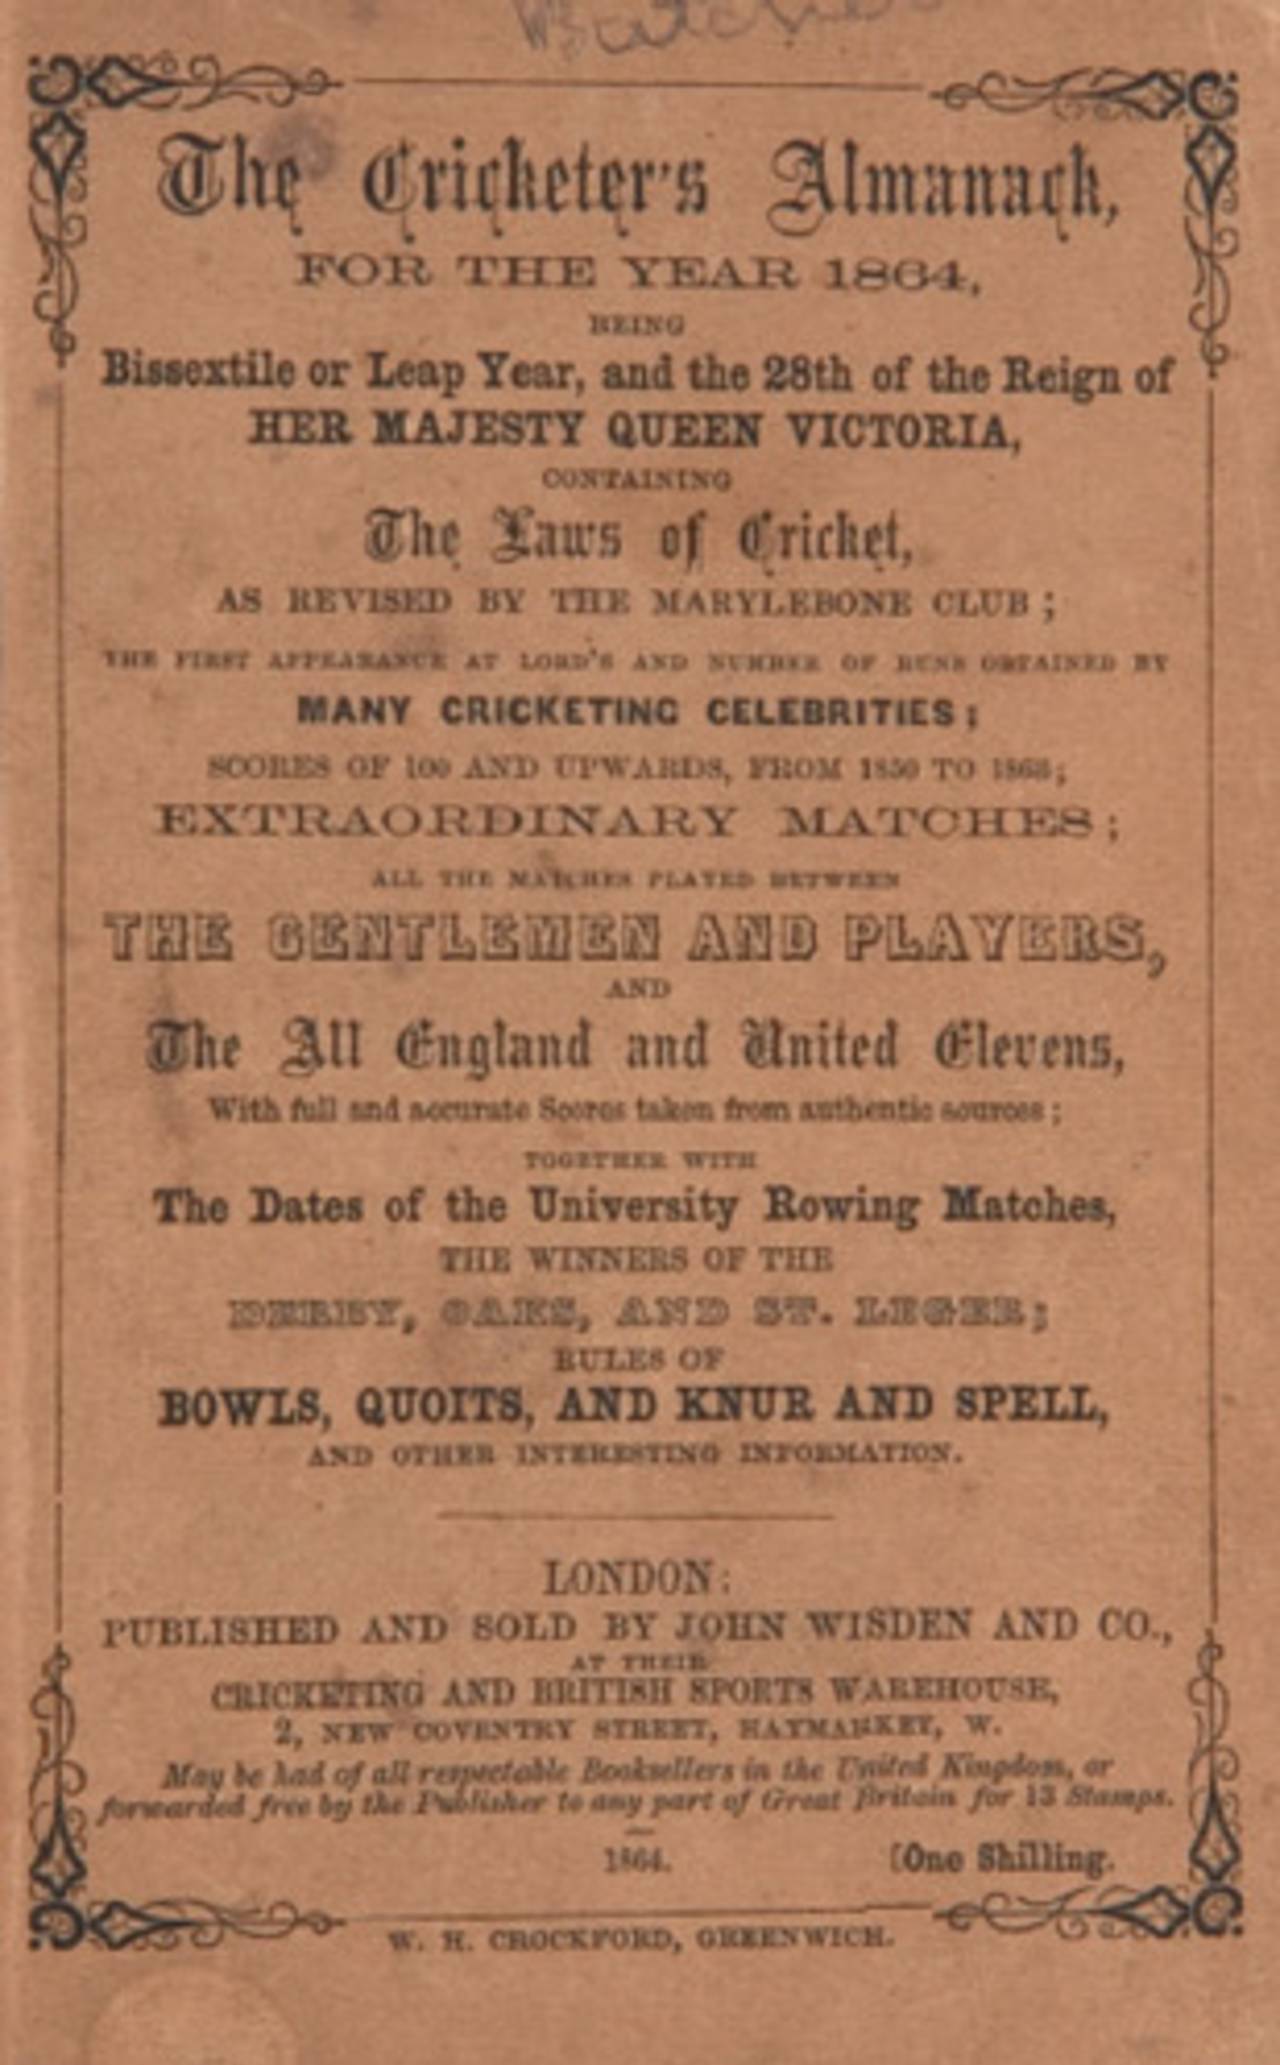 The cover of the 1904 Wisden Cricketers' Almanack